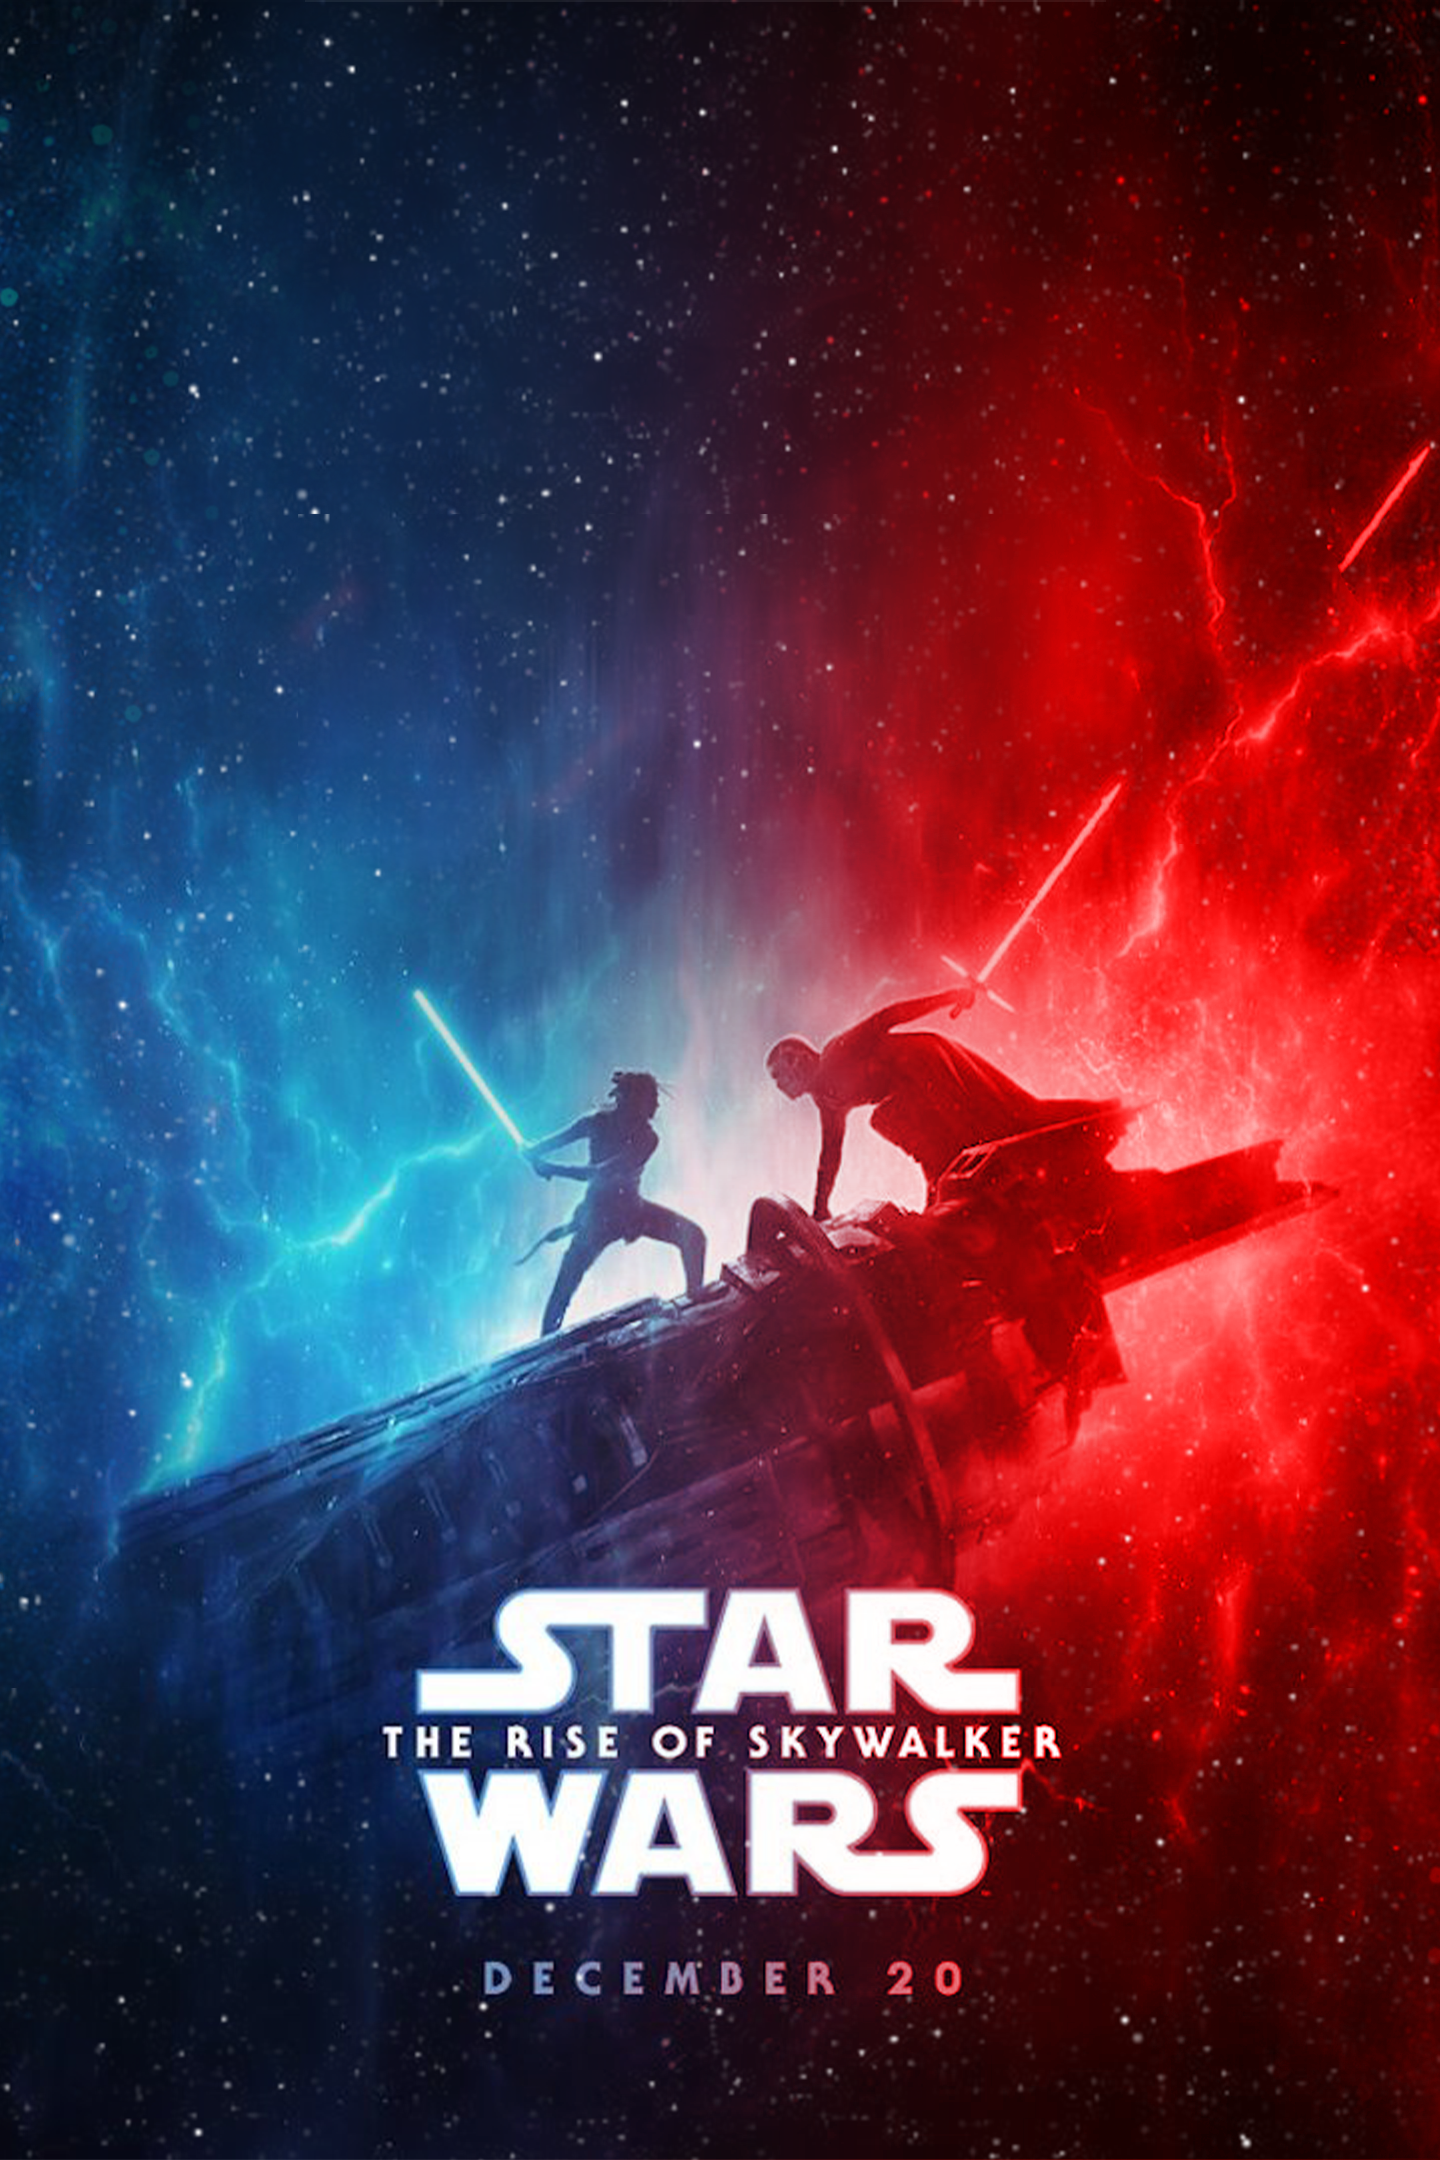 Mobile version of my The Rise Of Skywalker wallpaper